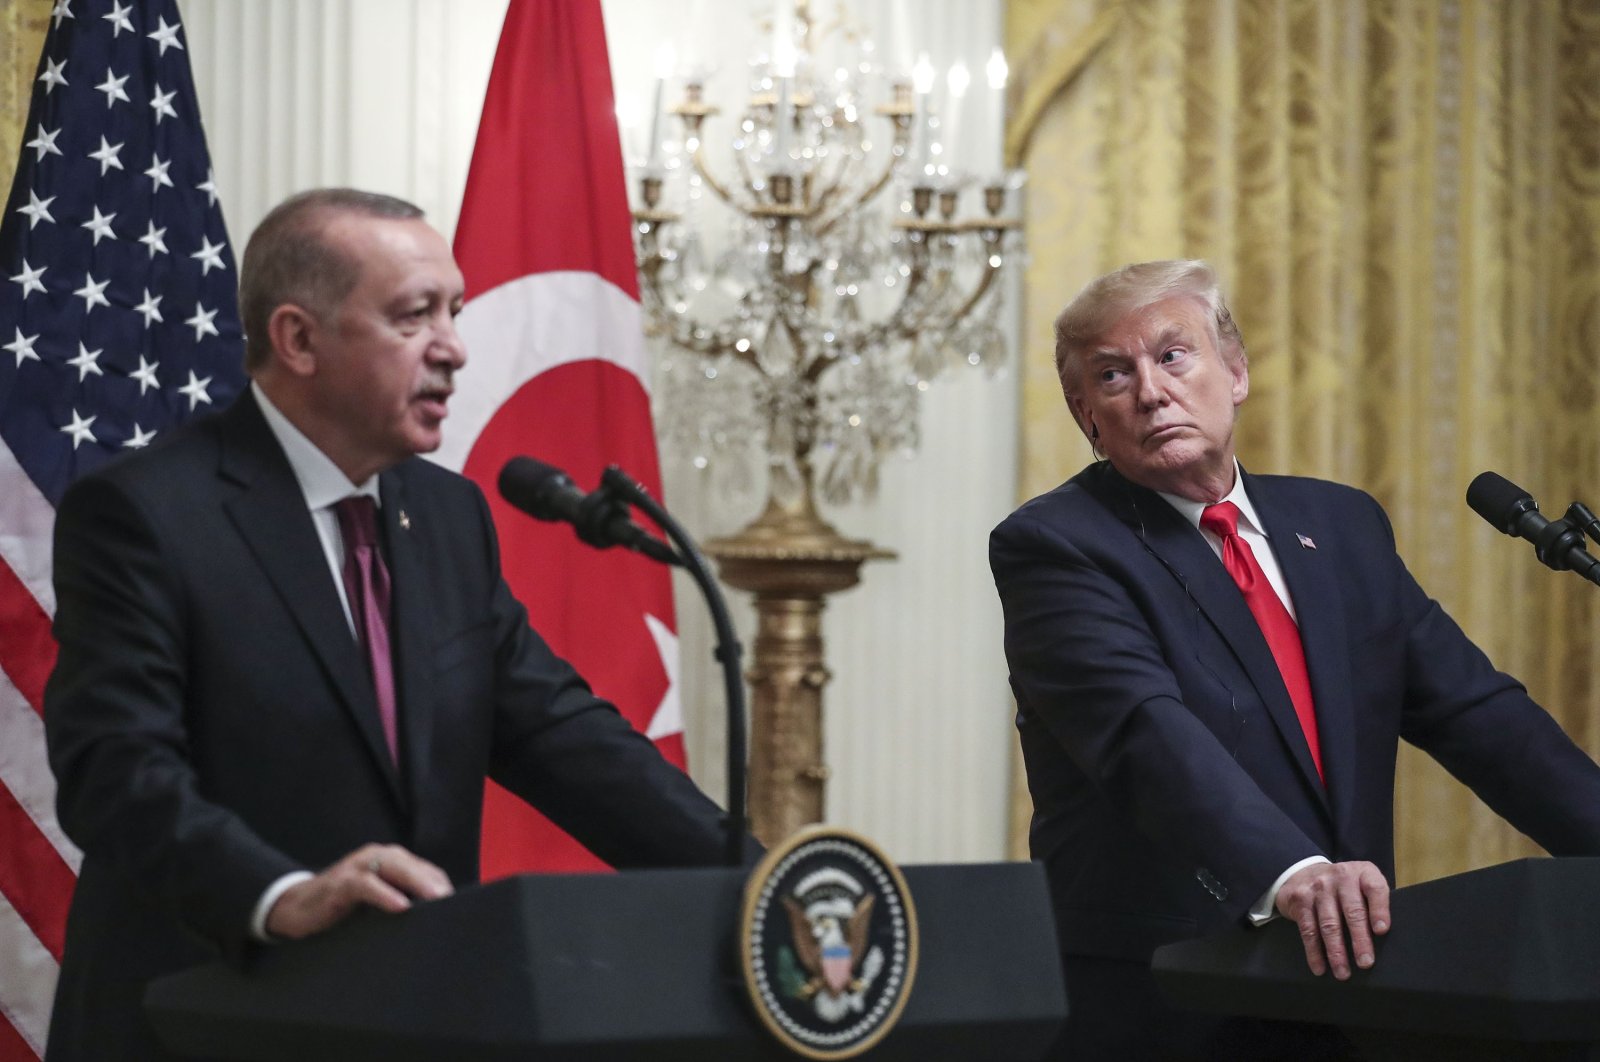 President Recep Tayyip Erdogan speaks during a press conference with then U.S. President Donald Trump in the East Room of the White House, Washington, D.C., Nov. 13, 2019. (Getty Images)